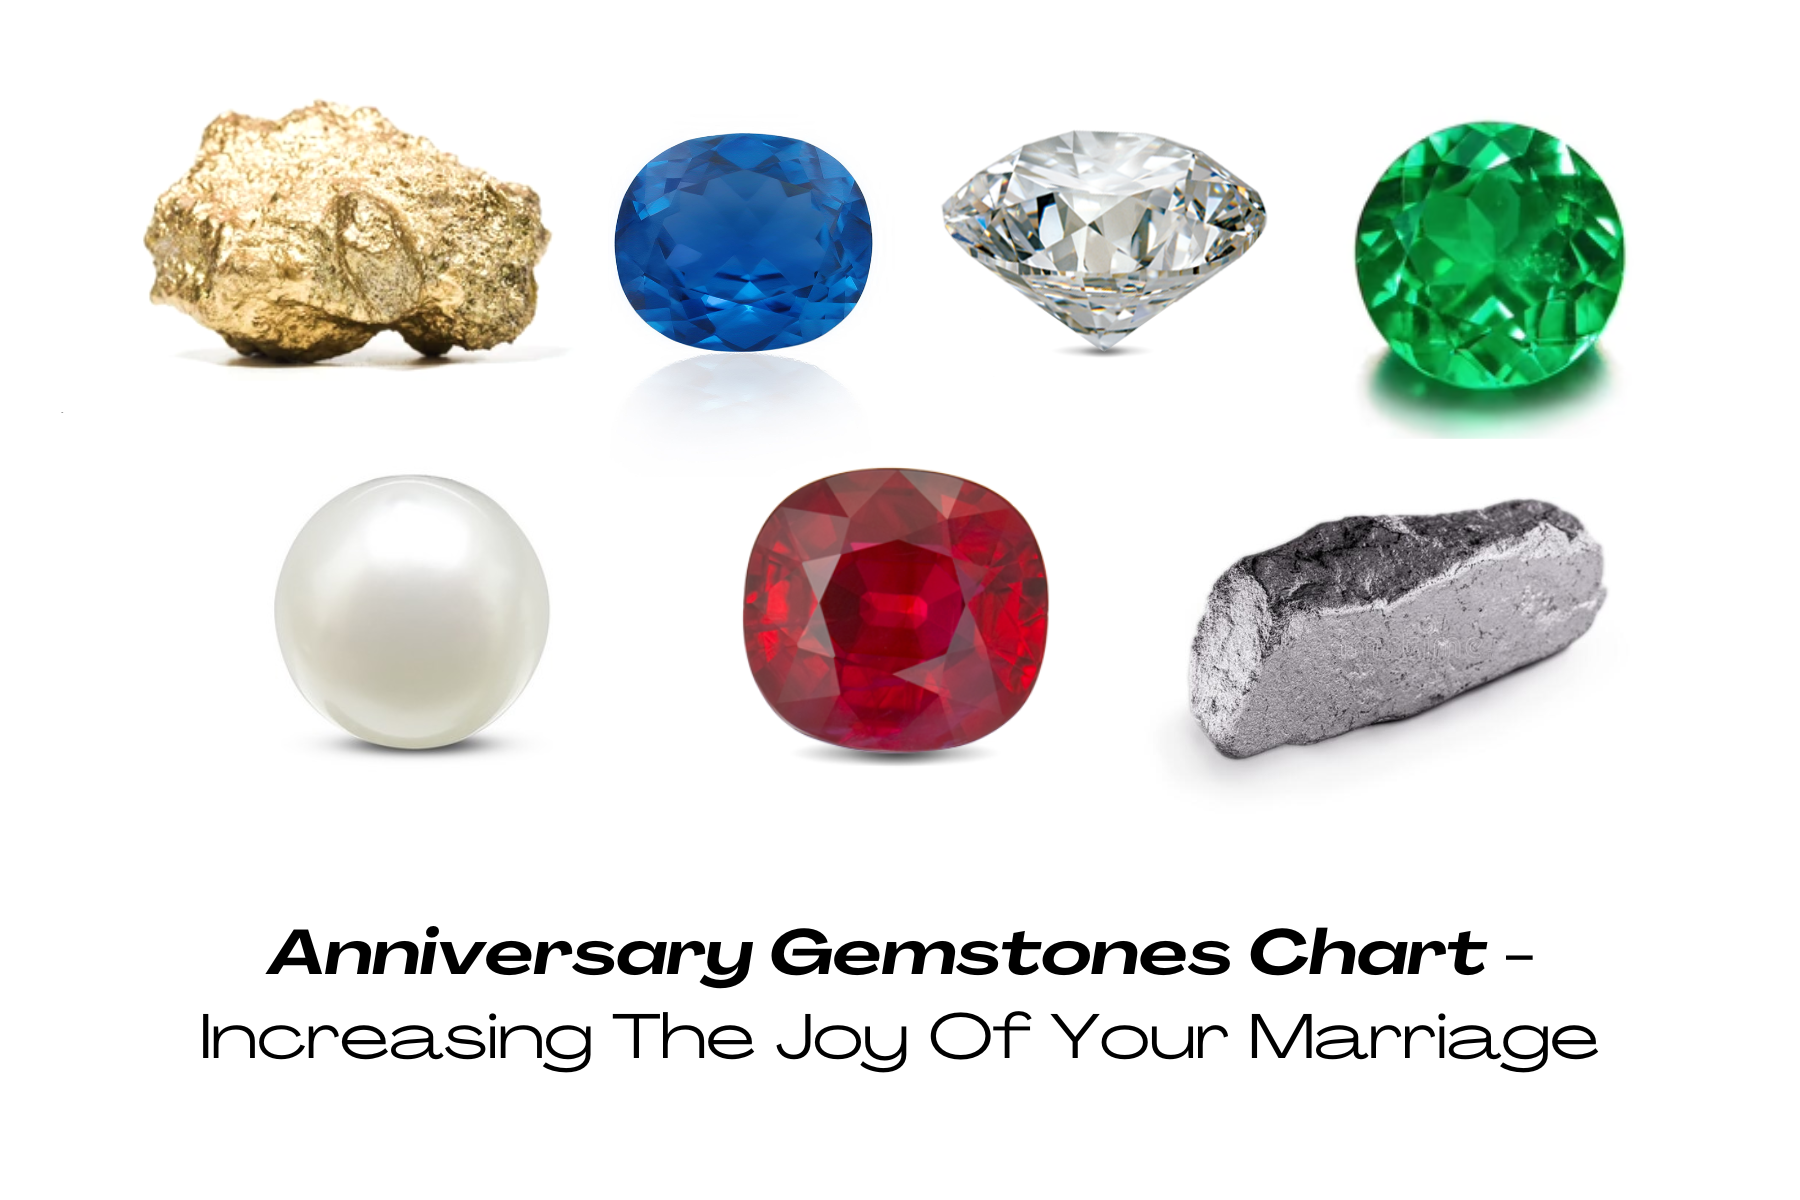 Anniversary Gemstones Chart - Increasing The Joy Of Your Marriage